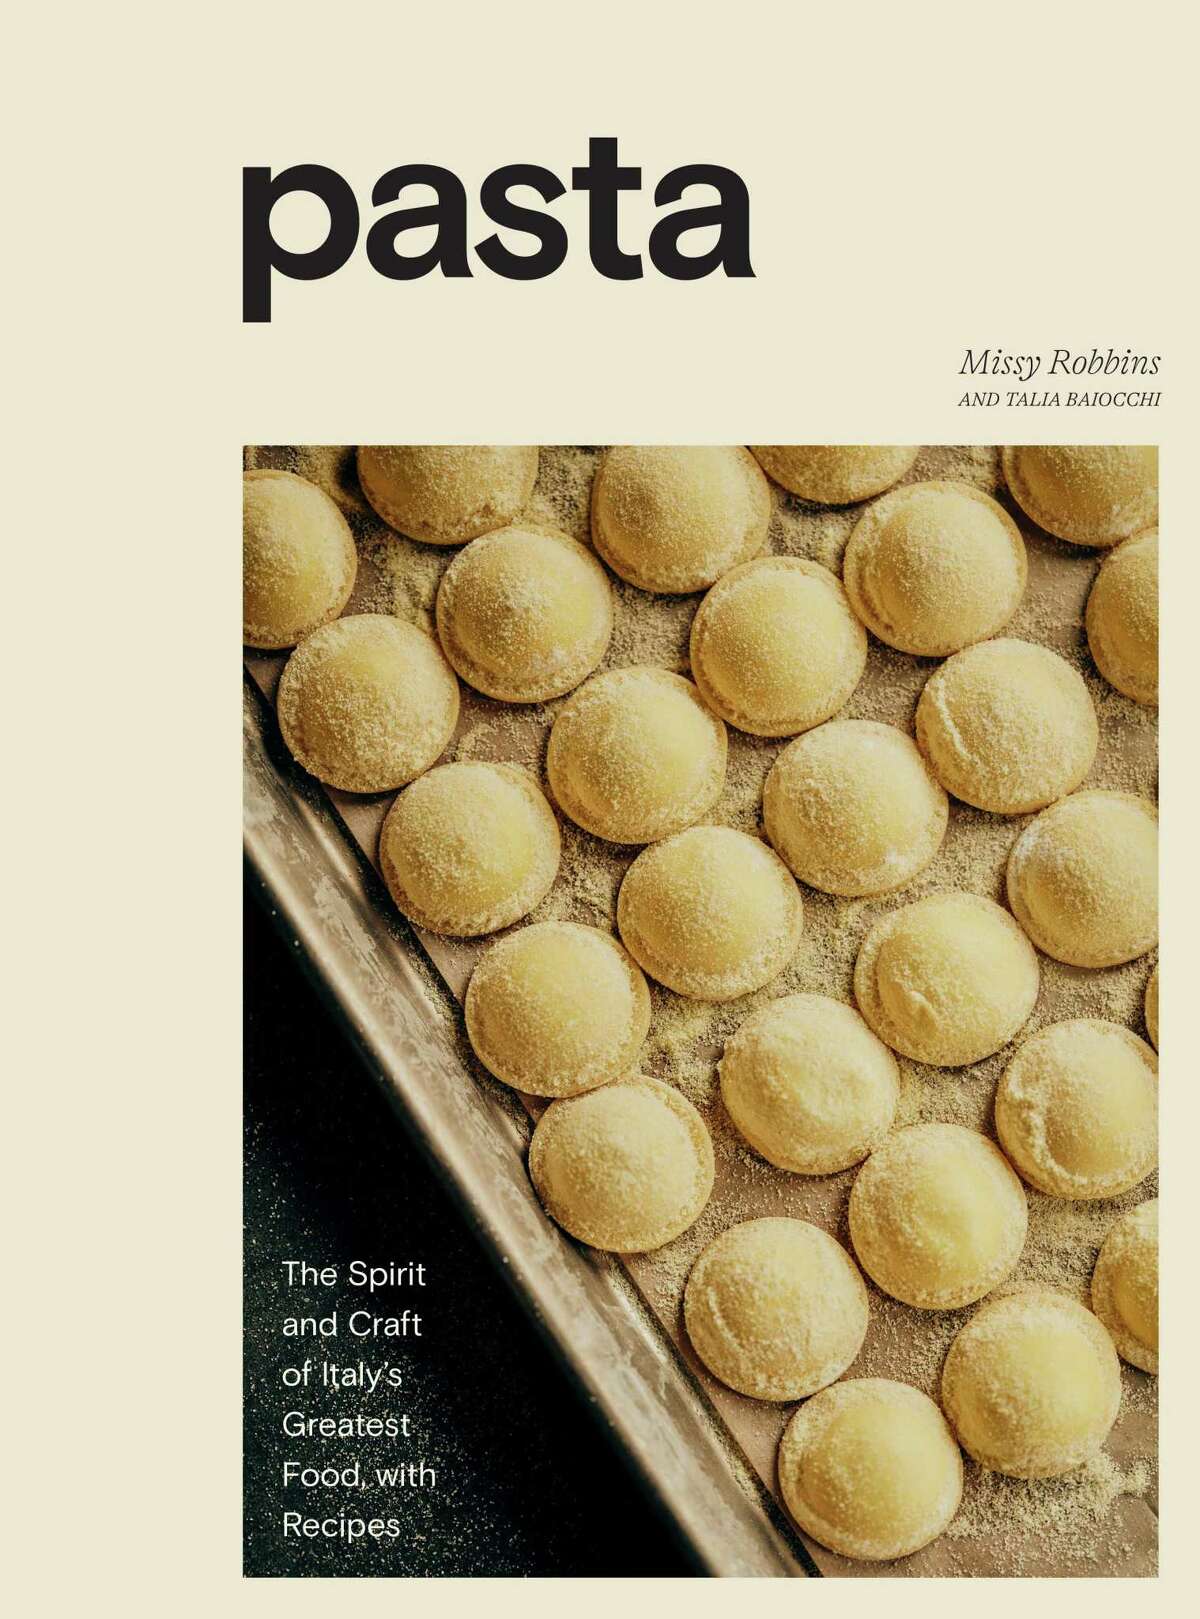 "Pasta" by Missy Robbins and Talia Baiocchi is one of The Chronicle's top cookbooks of 2021.